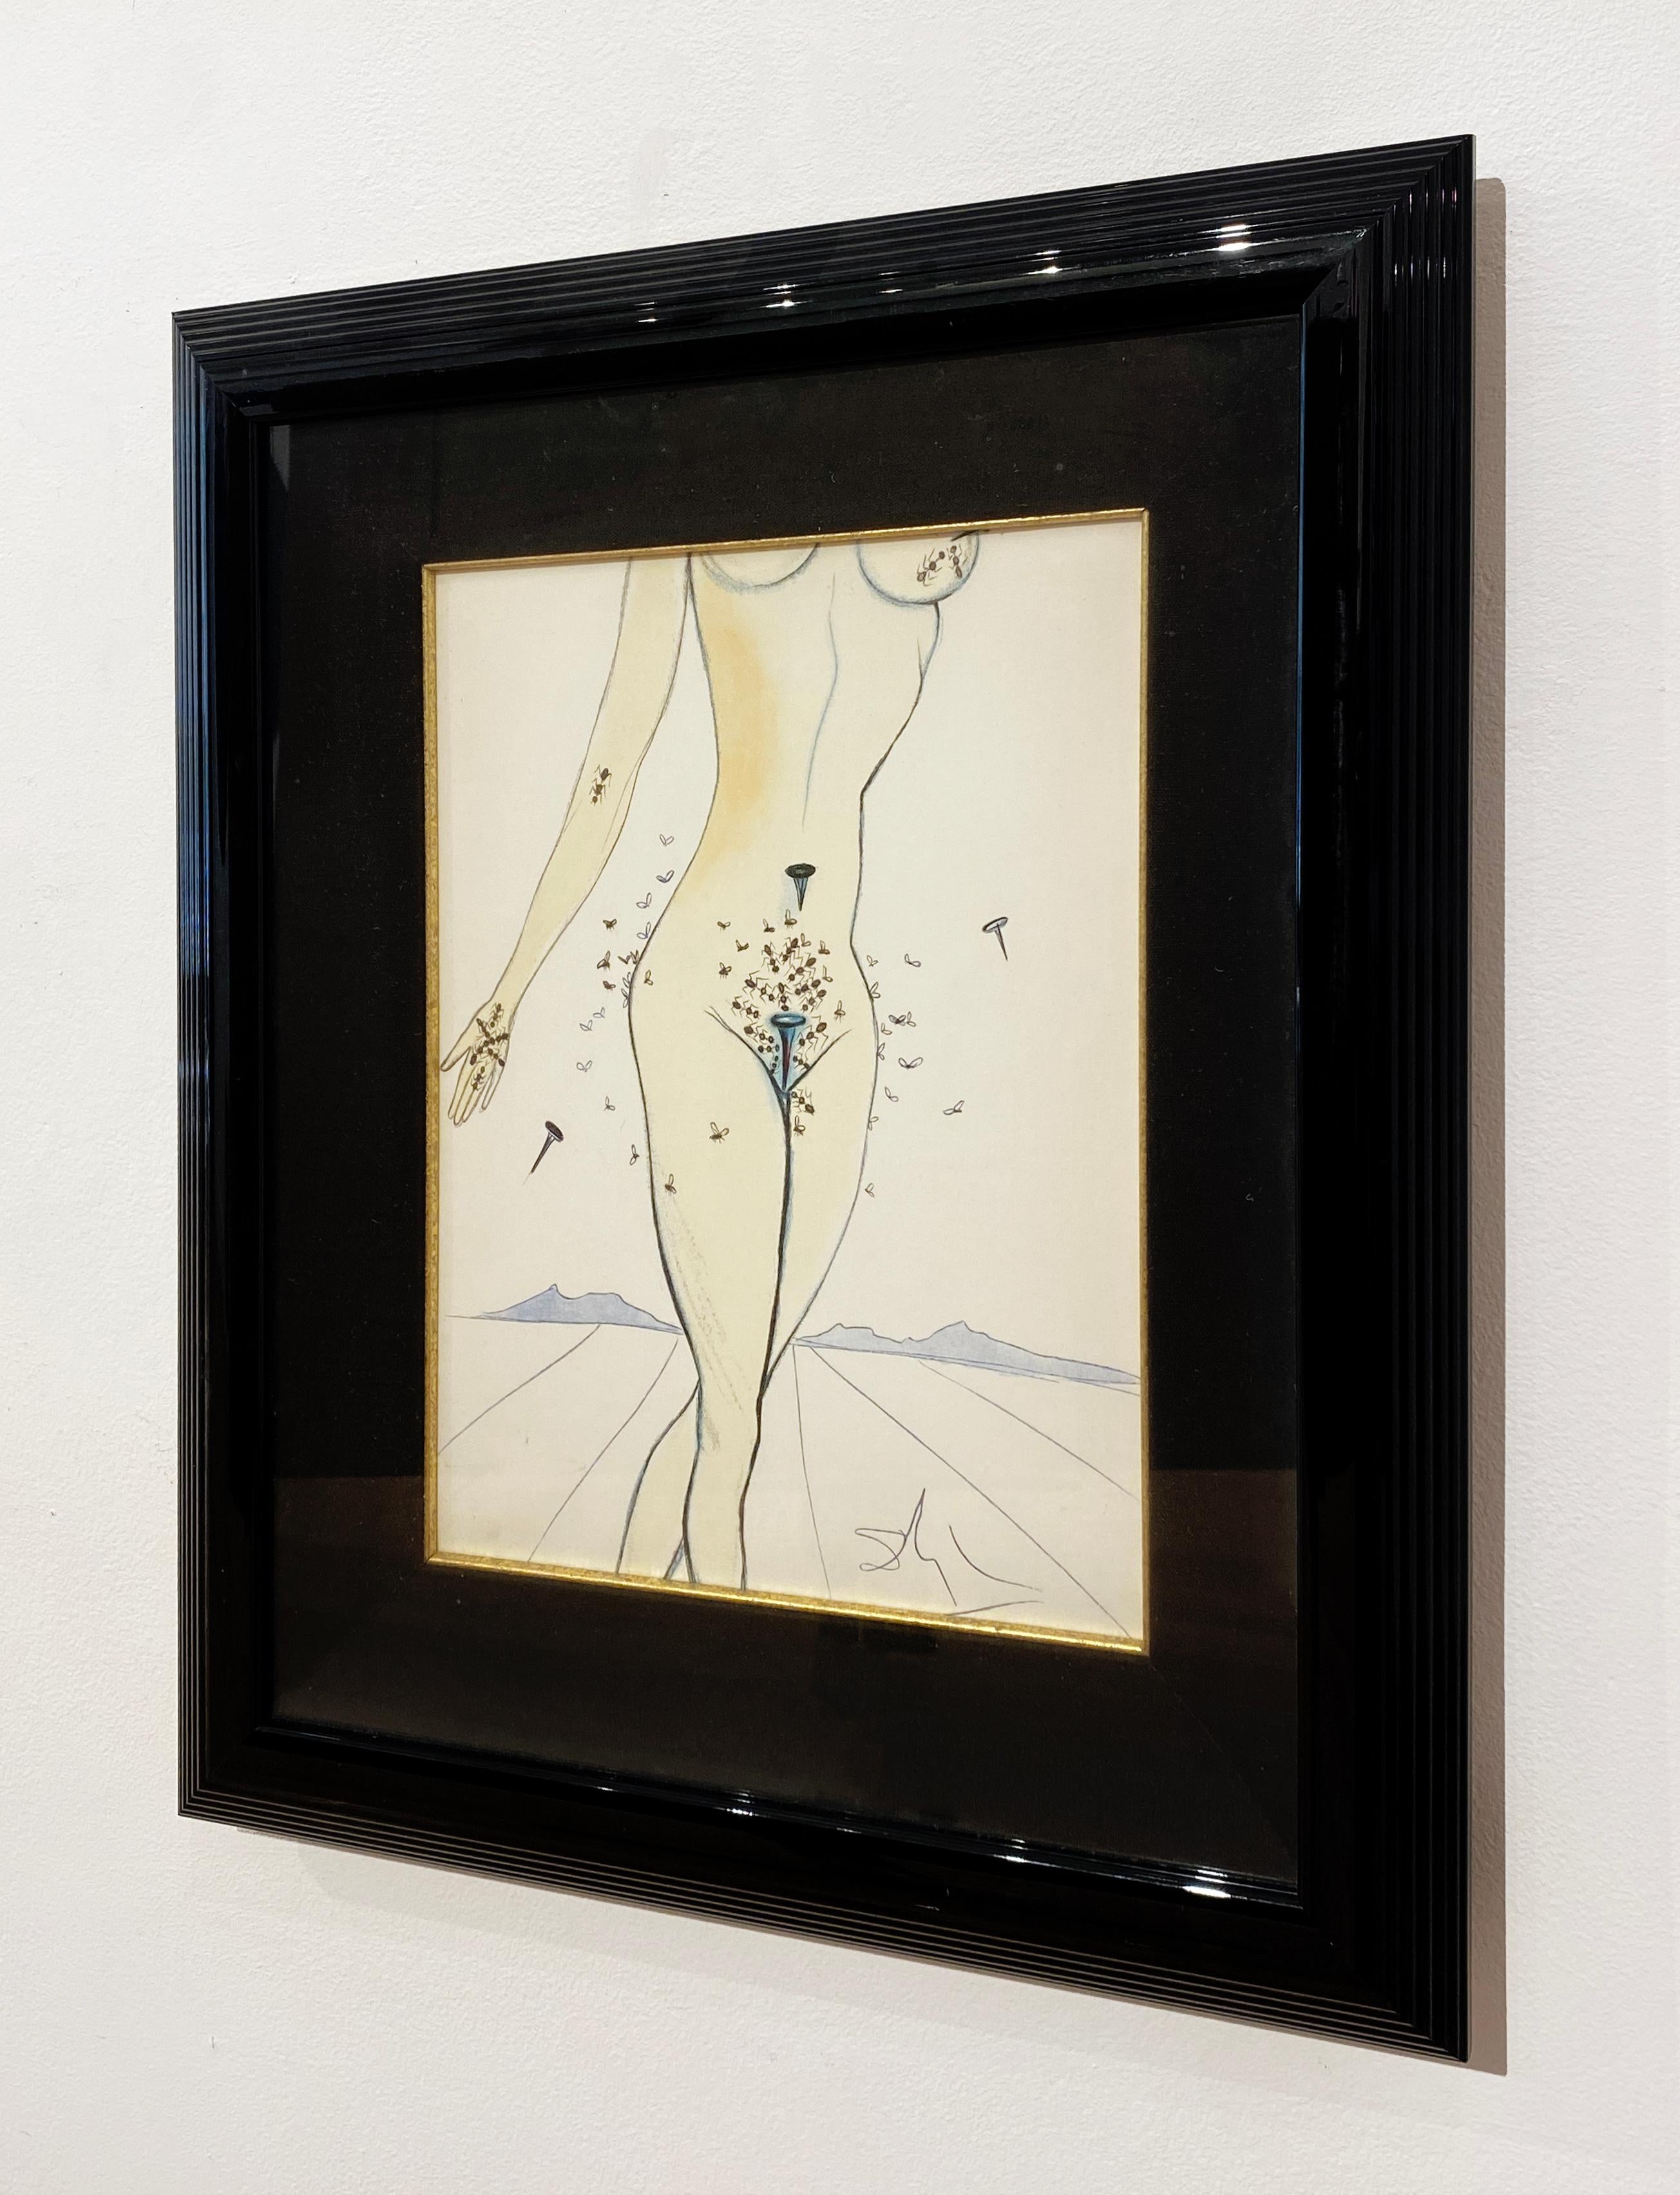 Artist:  Dali, Salvador
Title:  Ants, Snails, and Flies on Nude
Series:  Dali Illustre Casanova
Date:  1967
Medium:  drypoint with added watercolor
Unframed Dimensions: 14.75